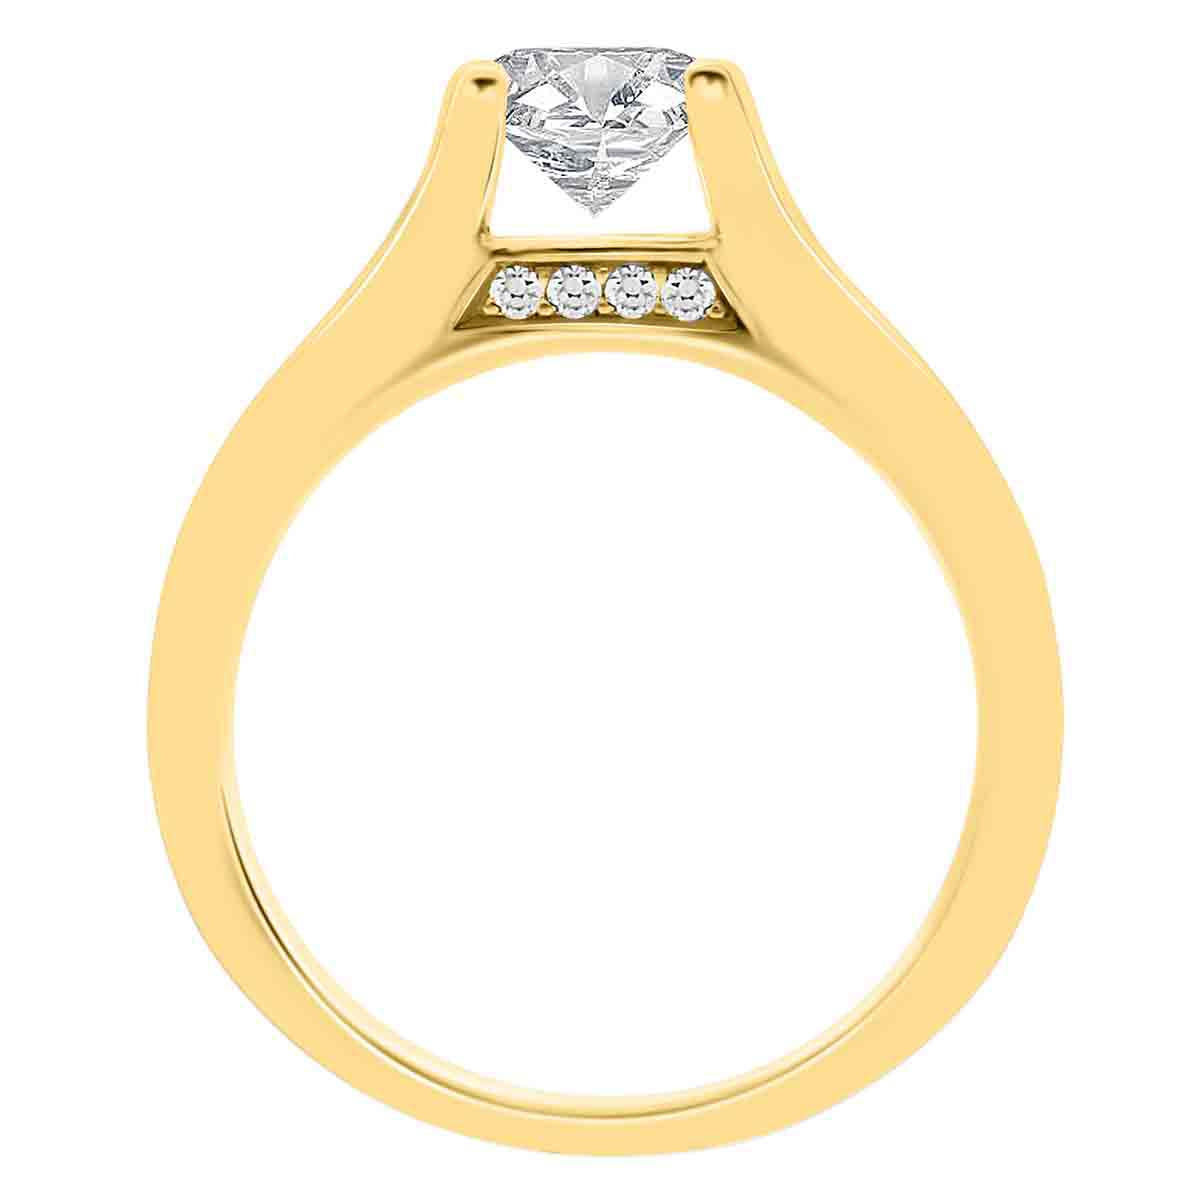 Channel Set Diamond Ring set in yellow gold standing upright